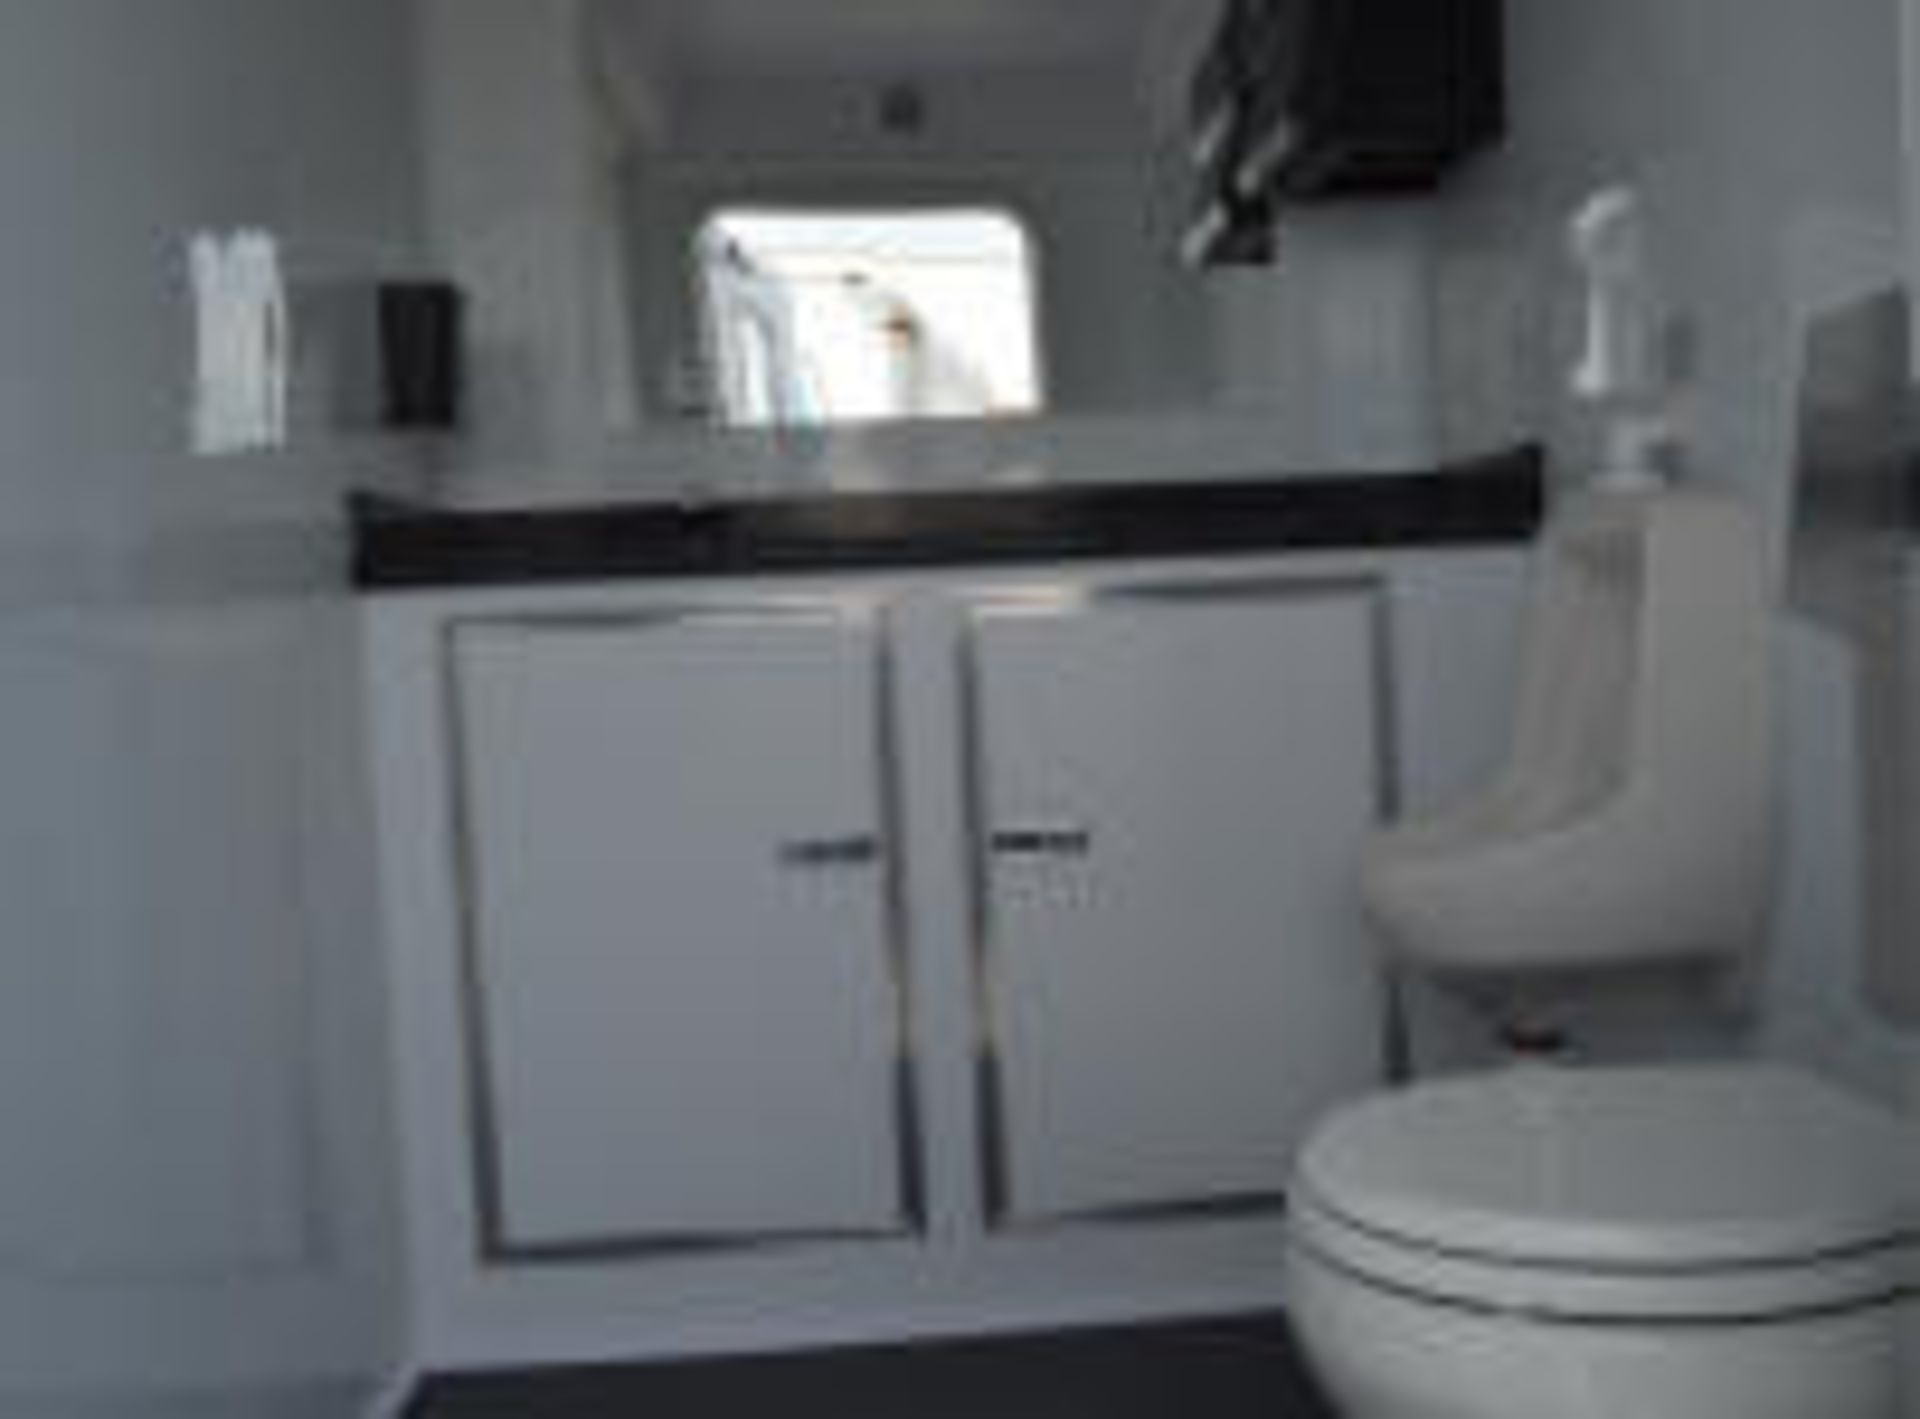 2016 COMFORTS OF HOME RESTROOM TRAILER, MDL 12', 3-STALL, VIN 4C9TN1214GM081705 - Image 5 of 7